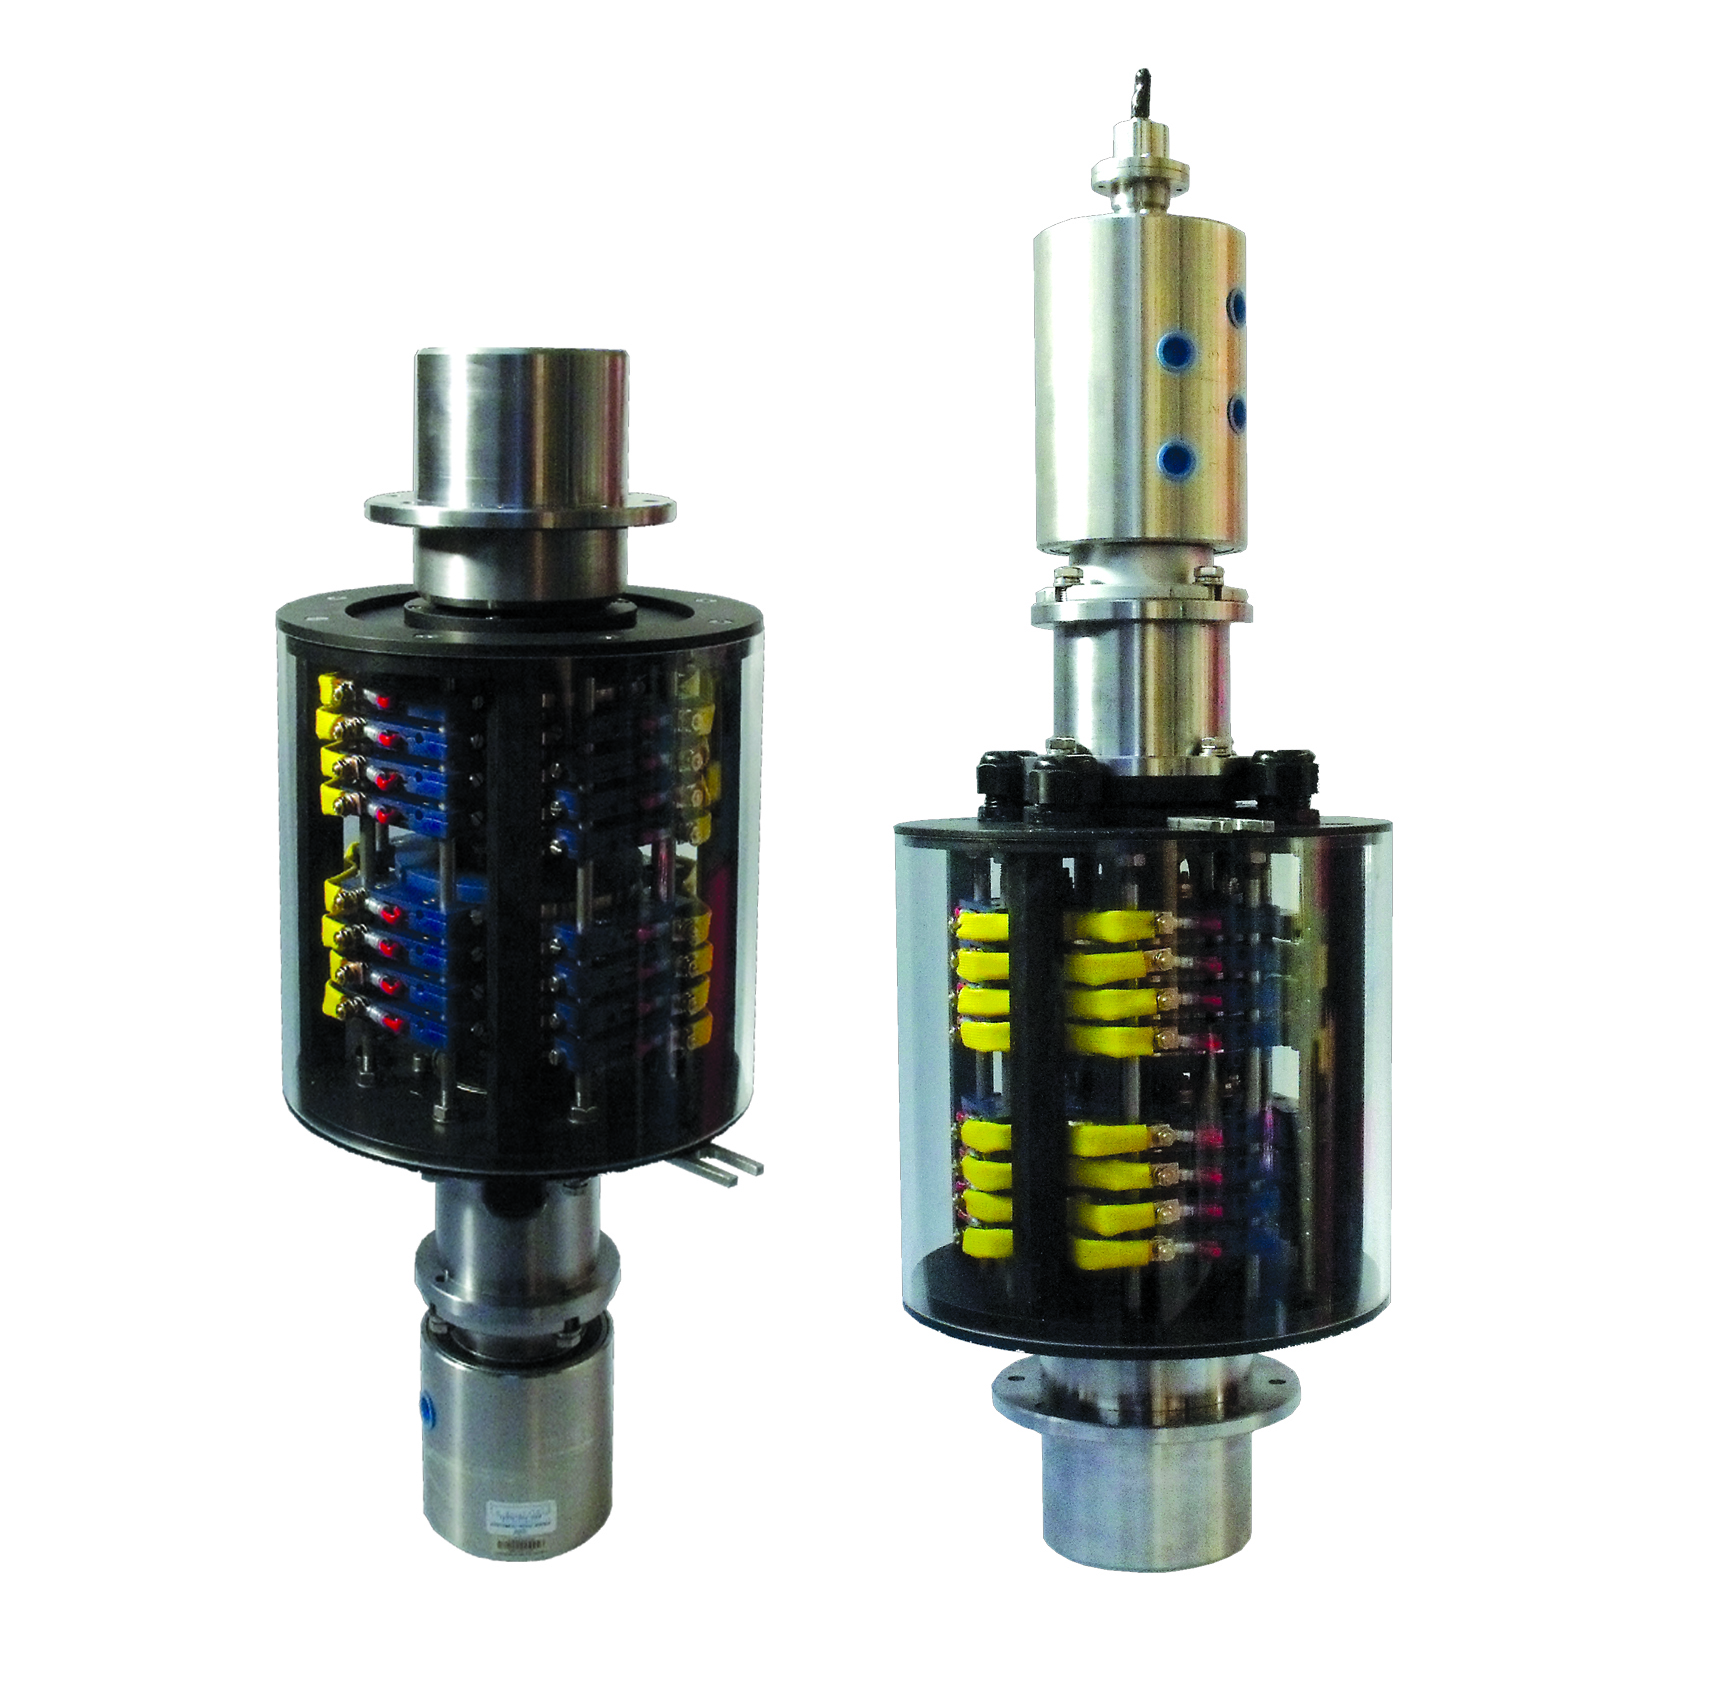 Optilinc FORJ combined with Slip Ring Assembly